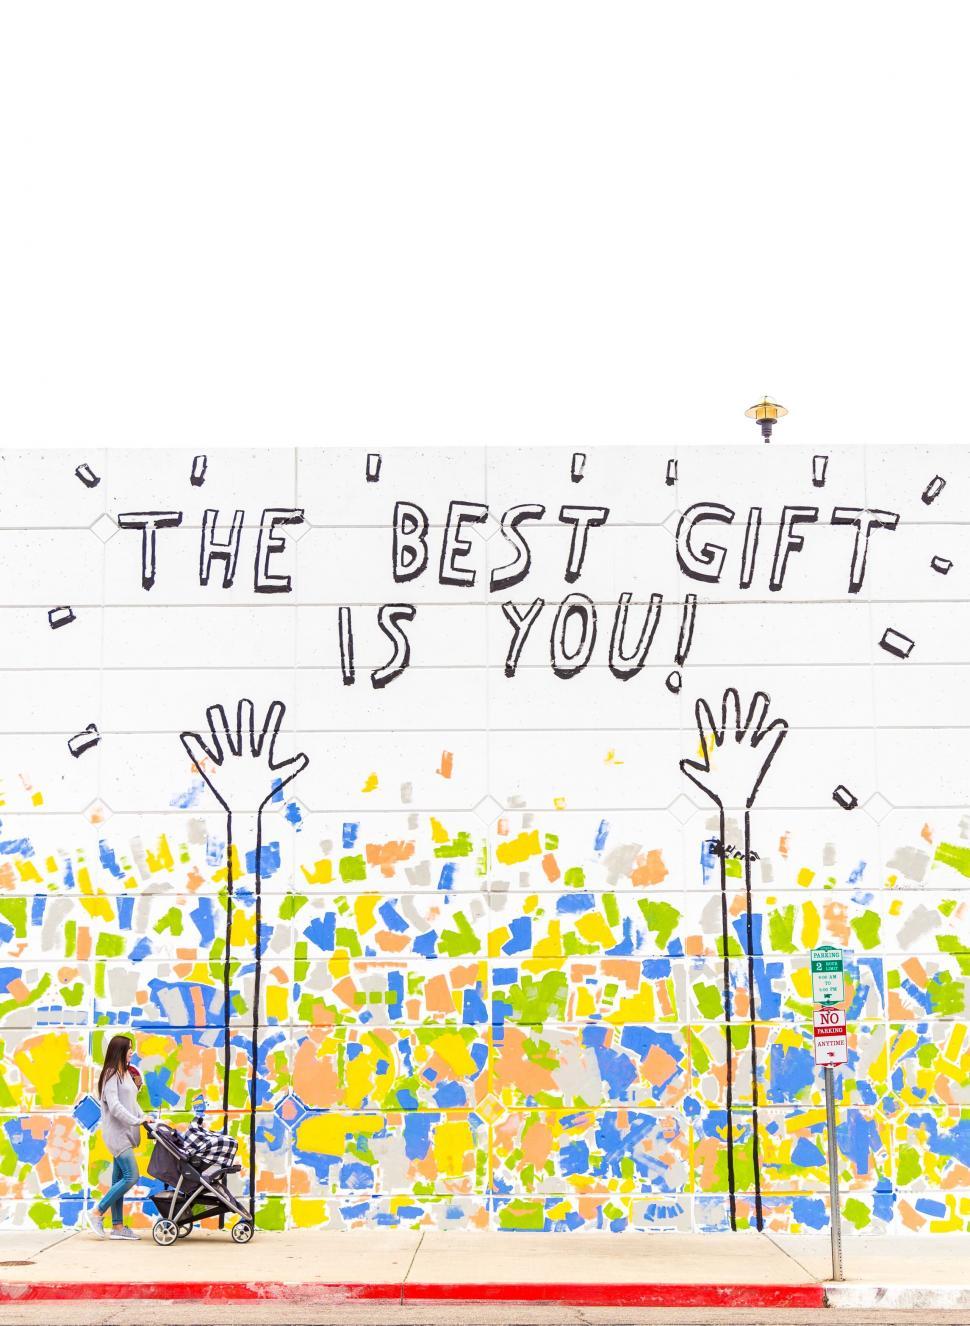 Free Image of Colorful mural with uplifting message 